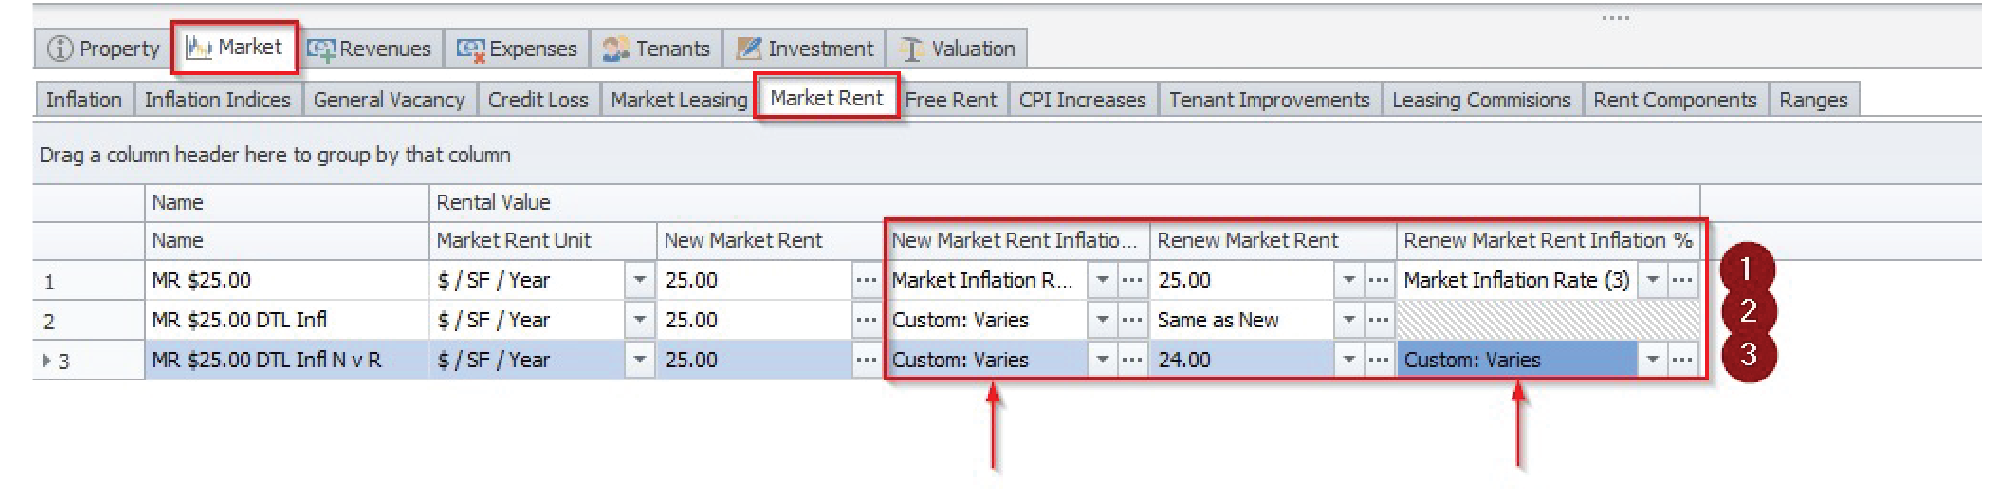 Screen shot of the Market Rent tab under the Market section in Argus Enterprise.